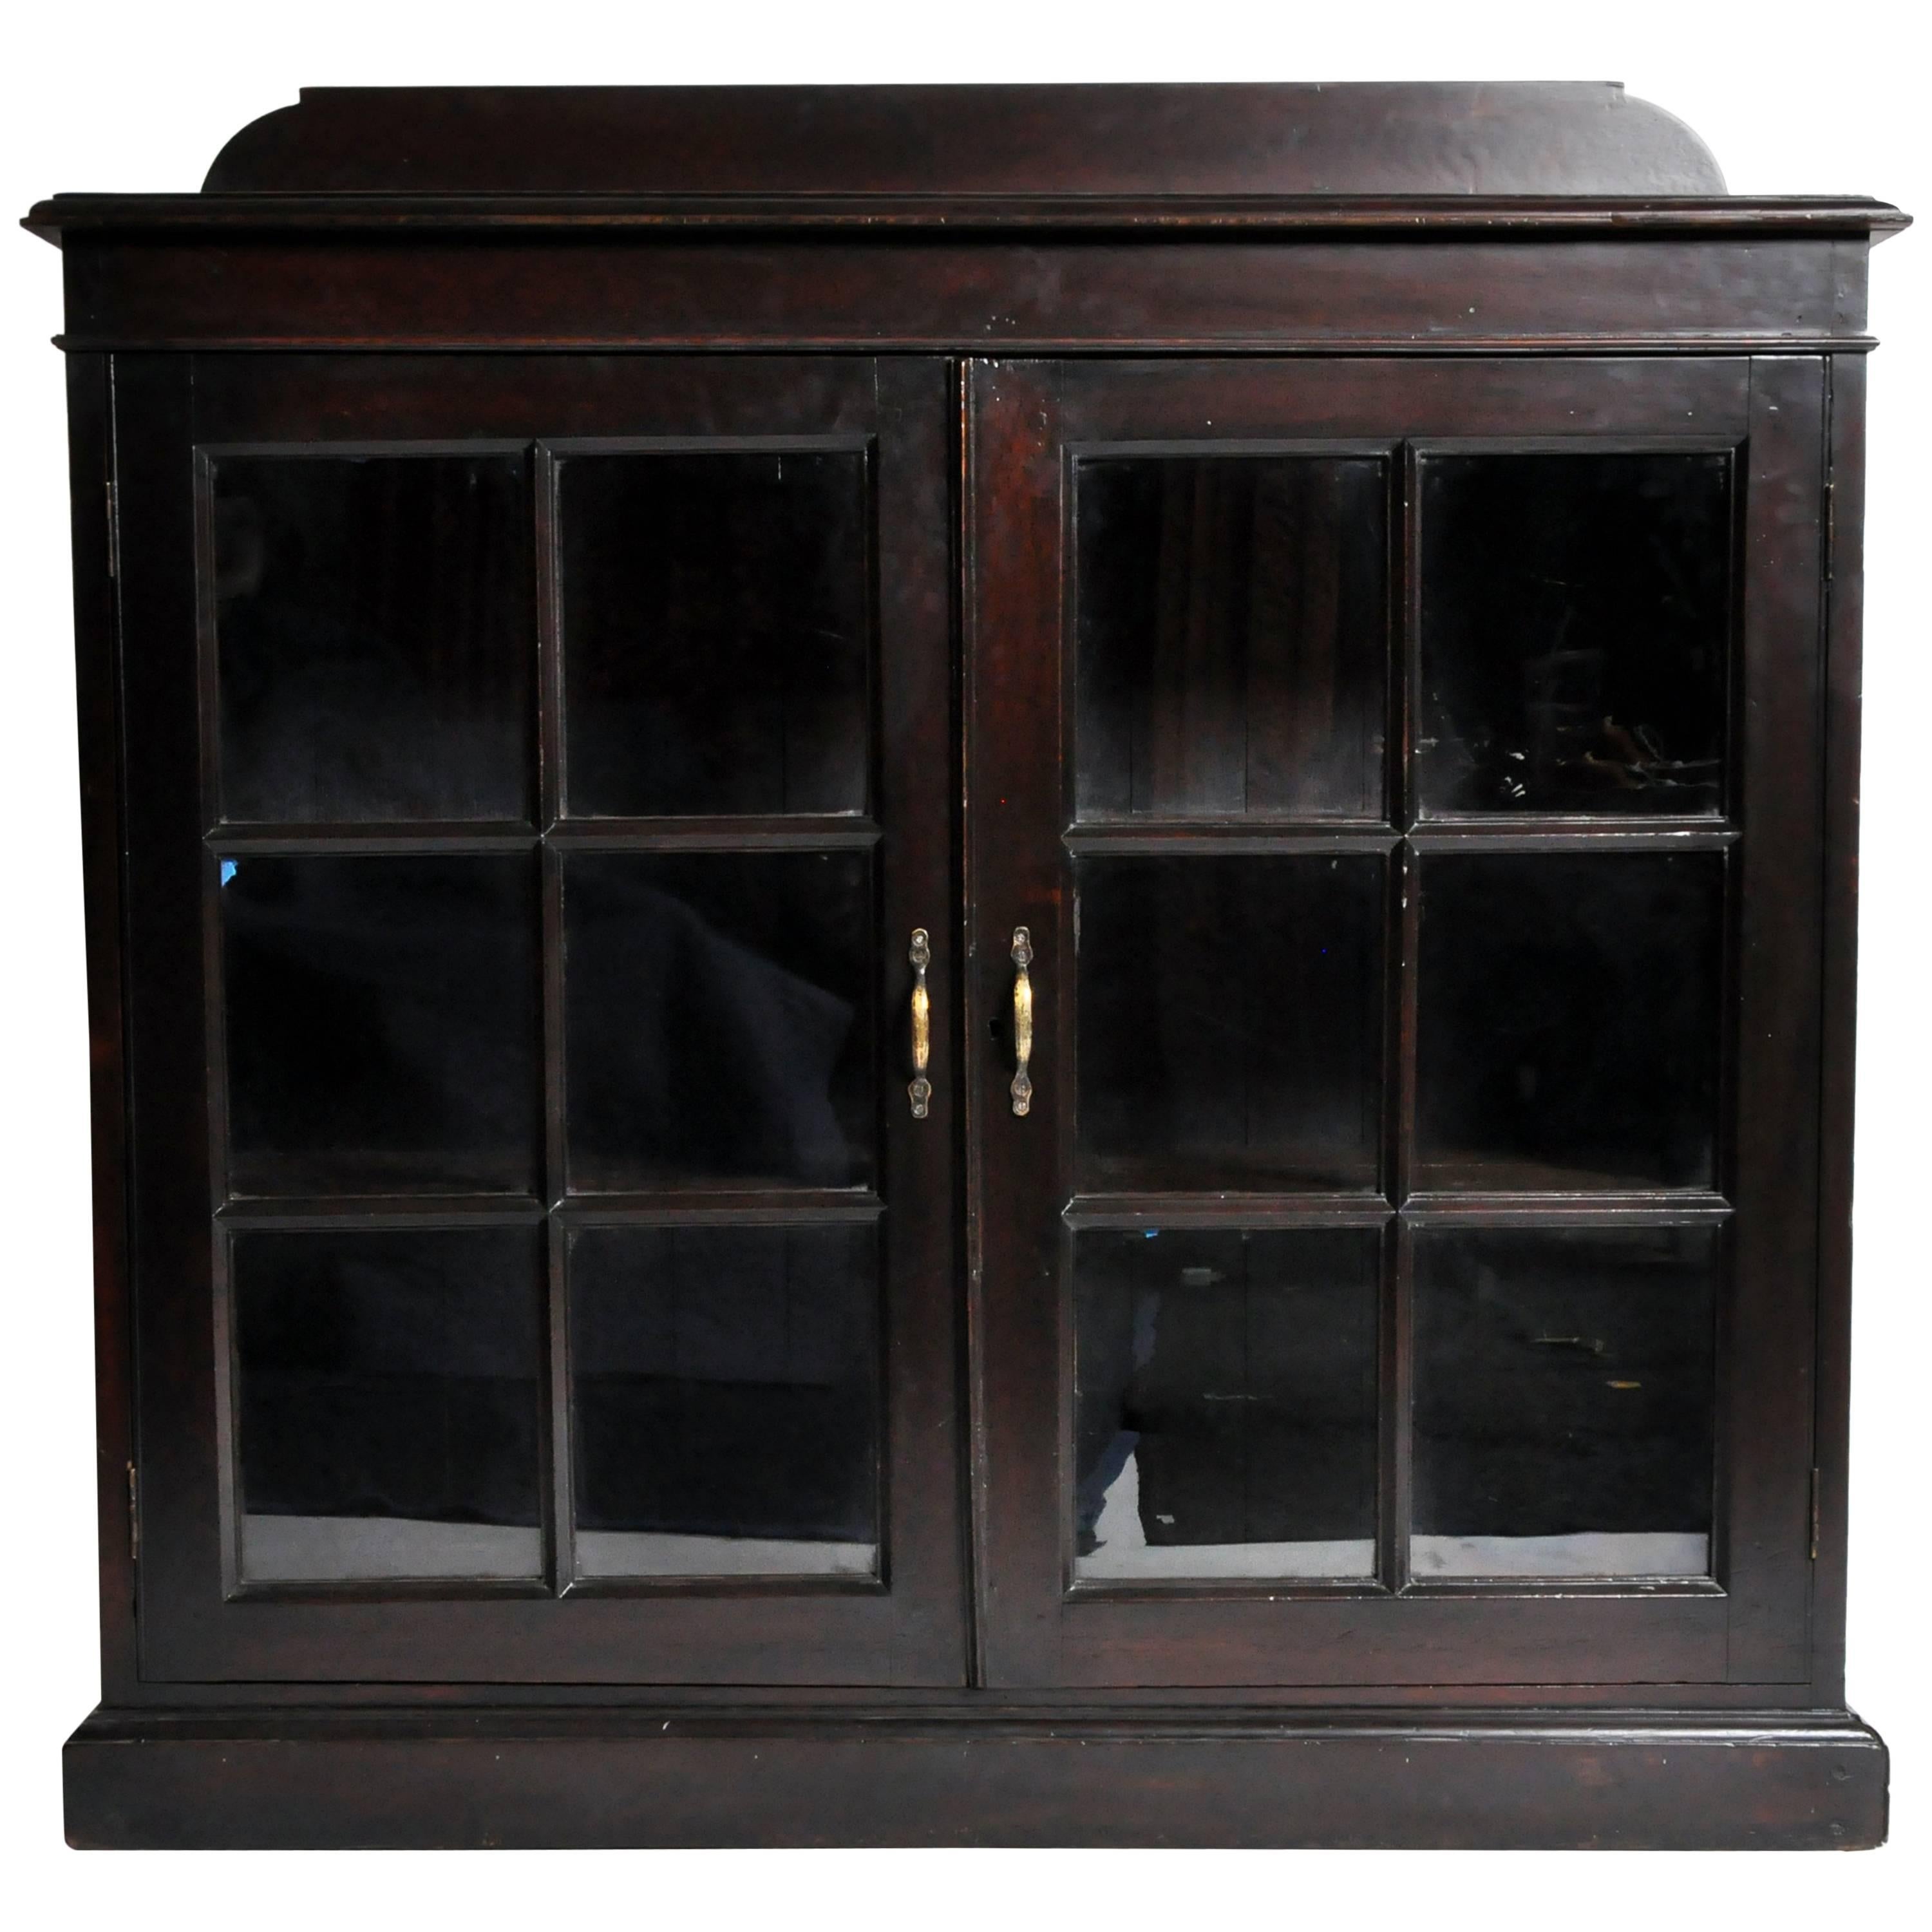 British Colonial Buffet with Glass Pane Doors